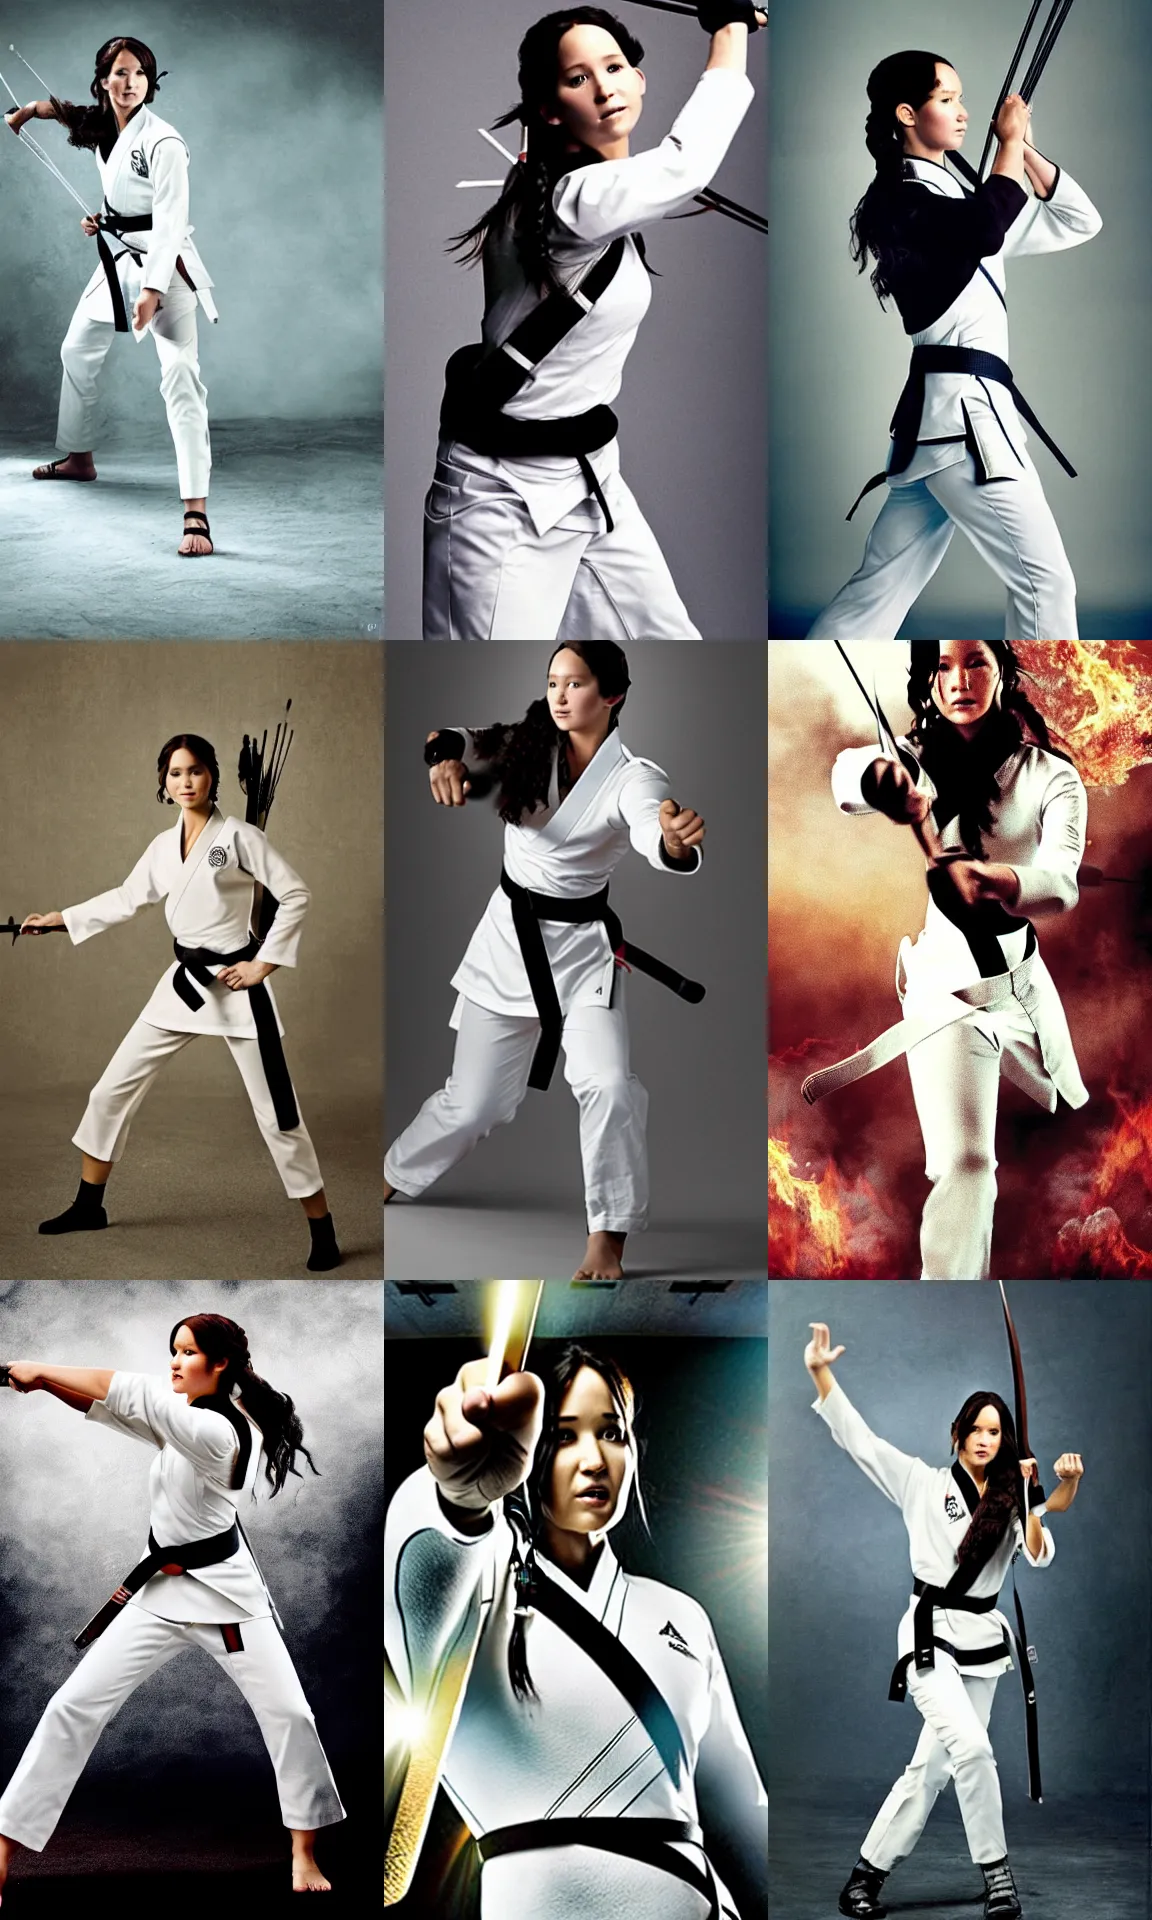 Prompt: katniss everdeen as a karate black belt, wearing a white gi, photography by annie leibovitz, action dynamic portrait